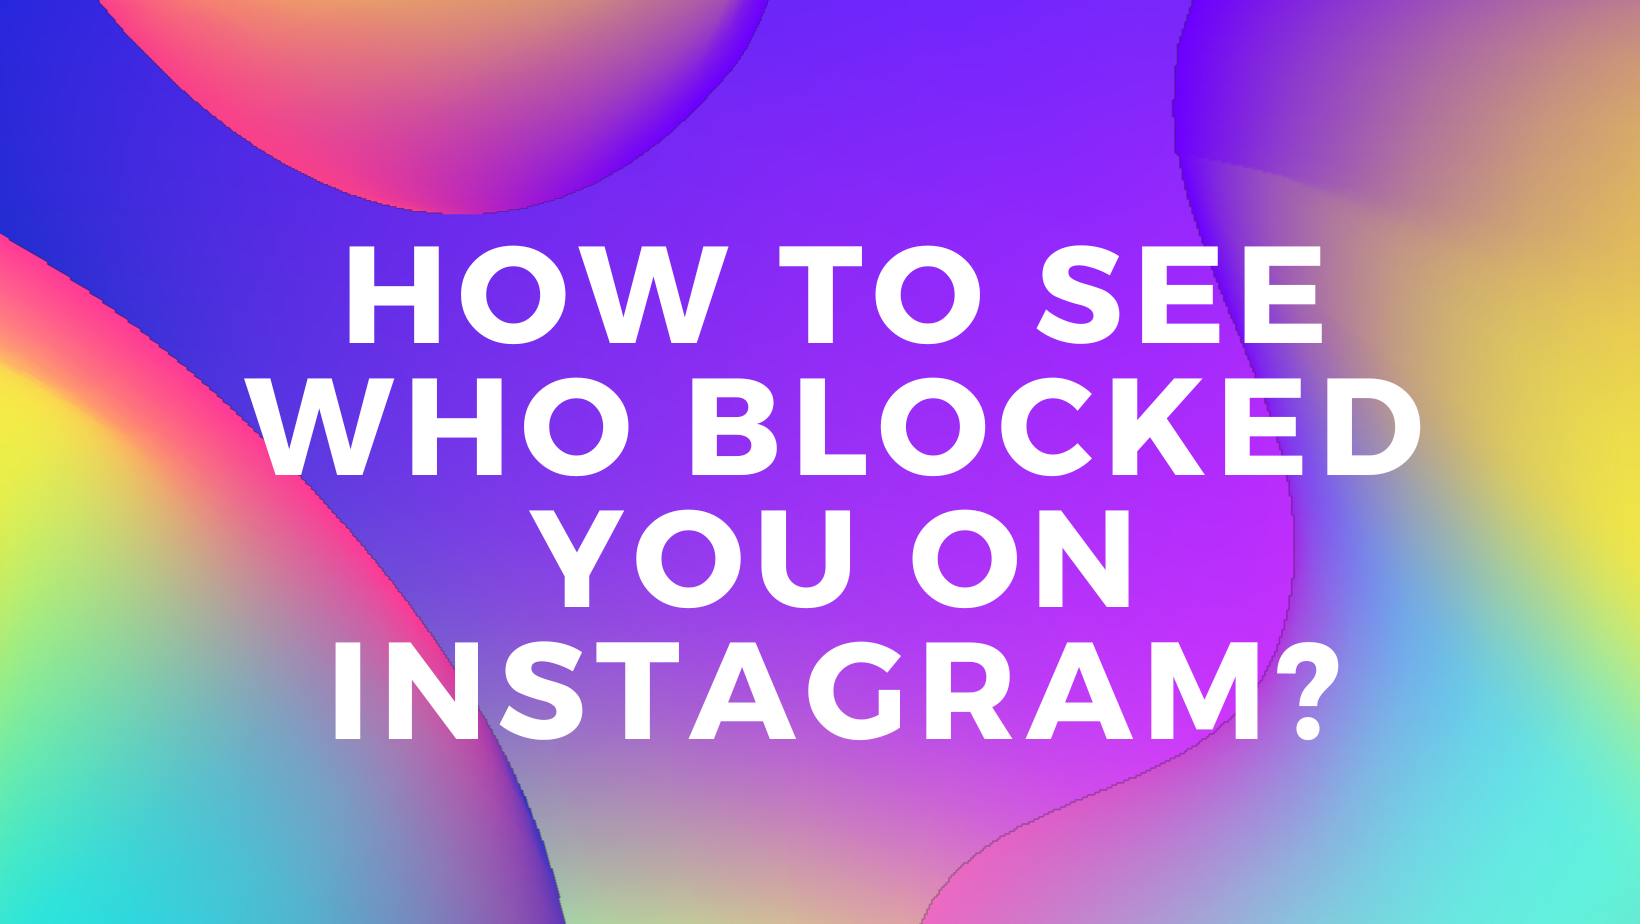 How to See who Blocked you on Instagram?